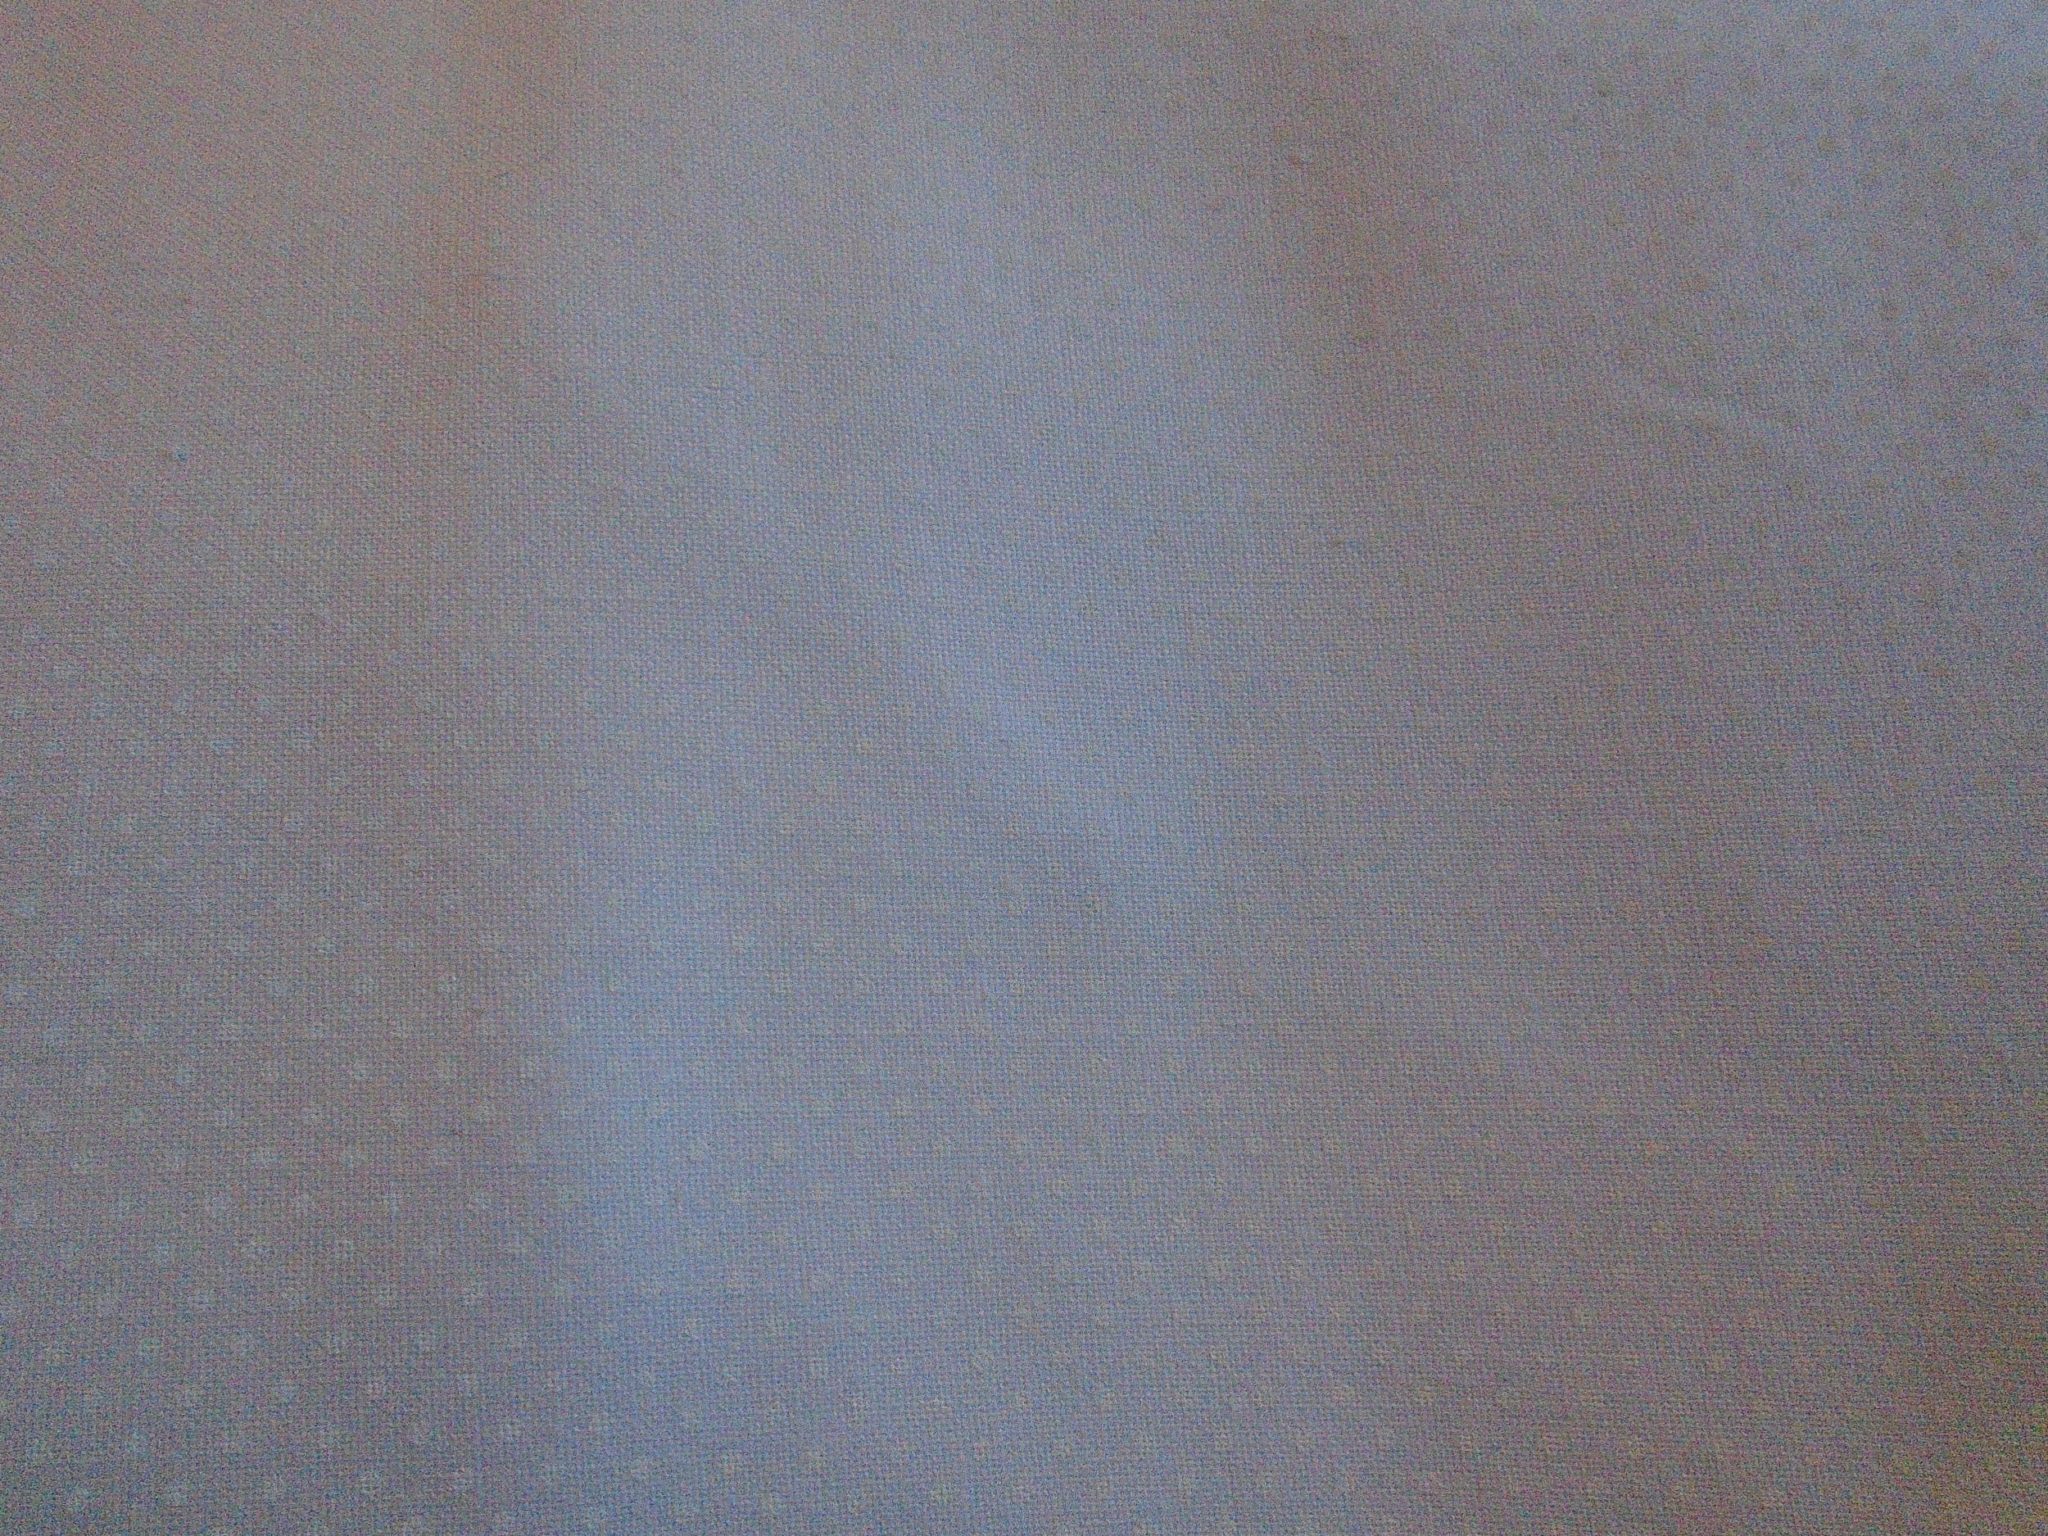 White with White Polka Dot Fabric 4.6 yards Sold by the Yard | Discount ...